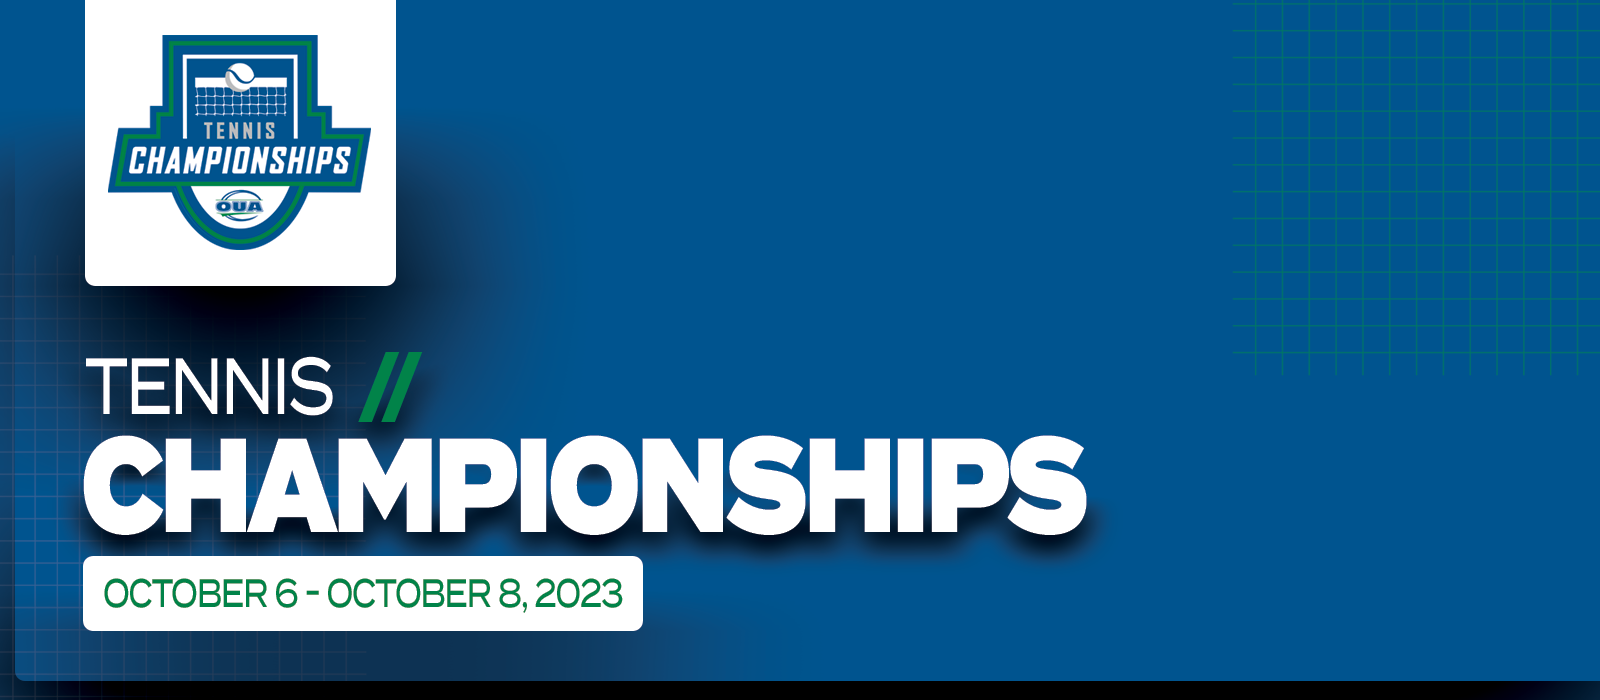 Predominantly blue graphic with large white text on the left side that reads Tennis Championships, October 6 – October 8, 2023’ beneath the OUA Tennis Championships logo